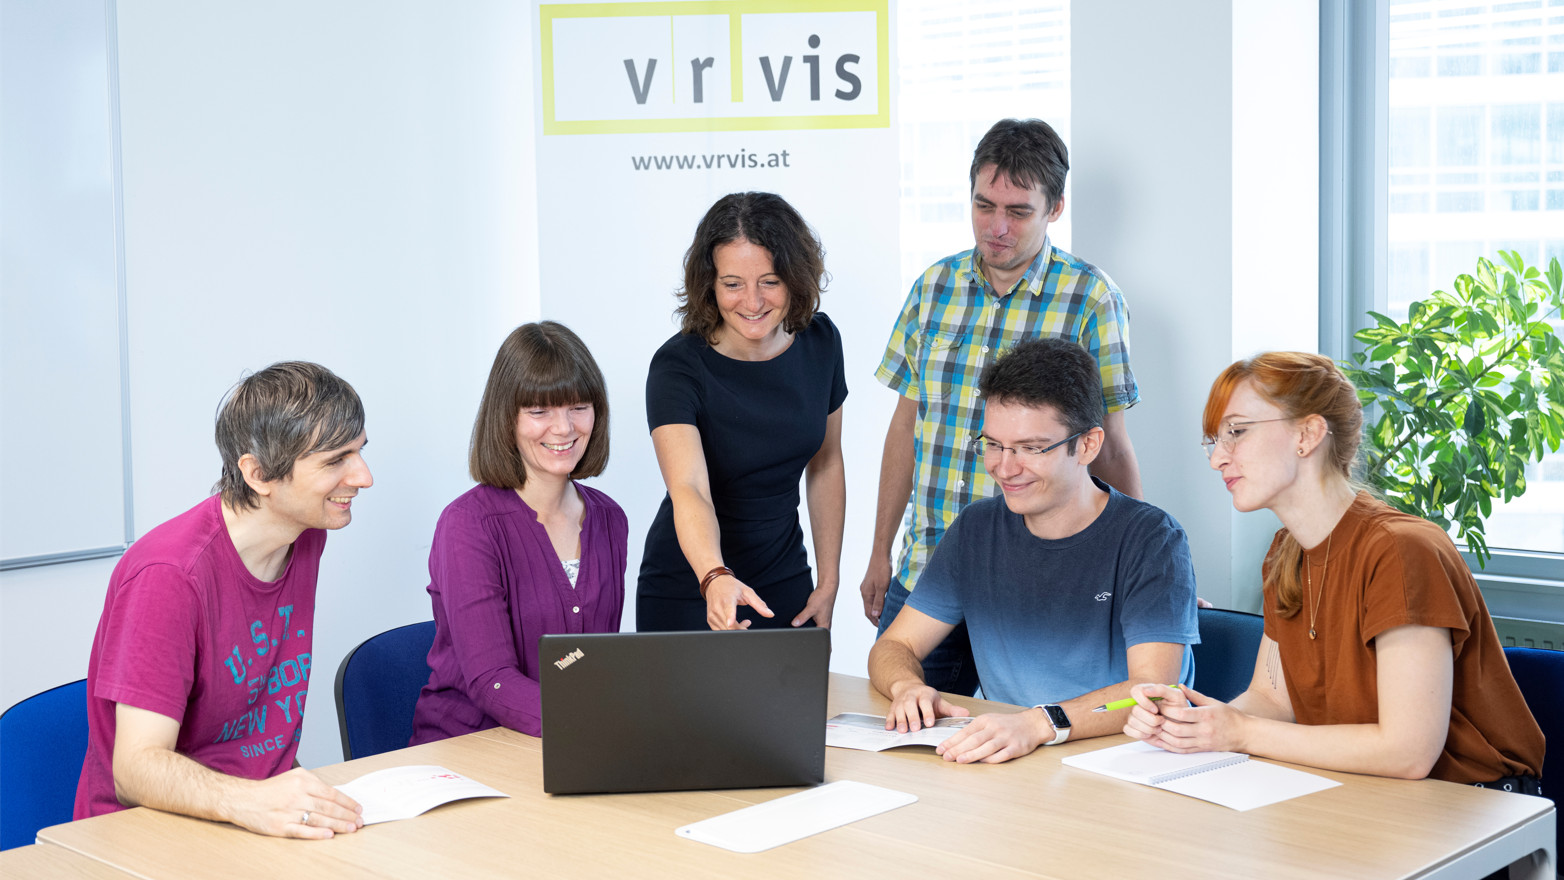 The Visual Analytics team of VRVis at a meeting desk with laptop and vrvis banner in the back.